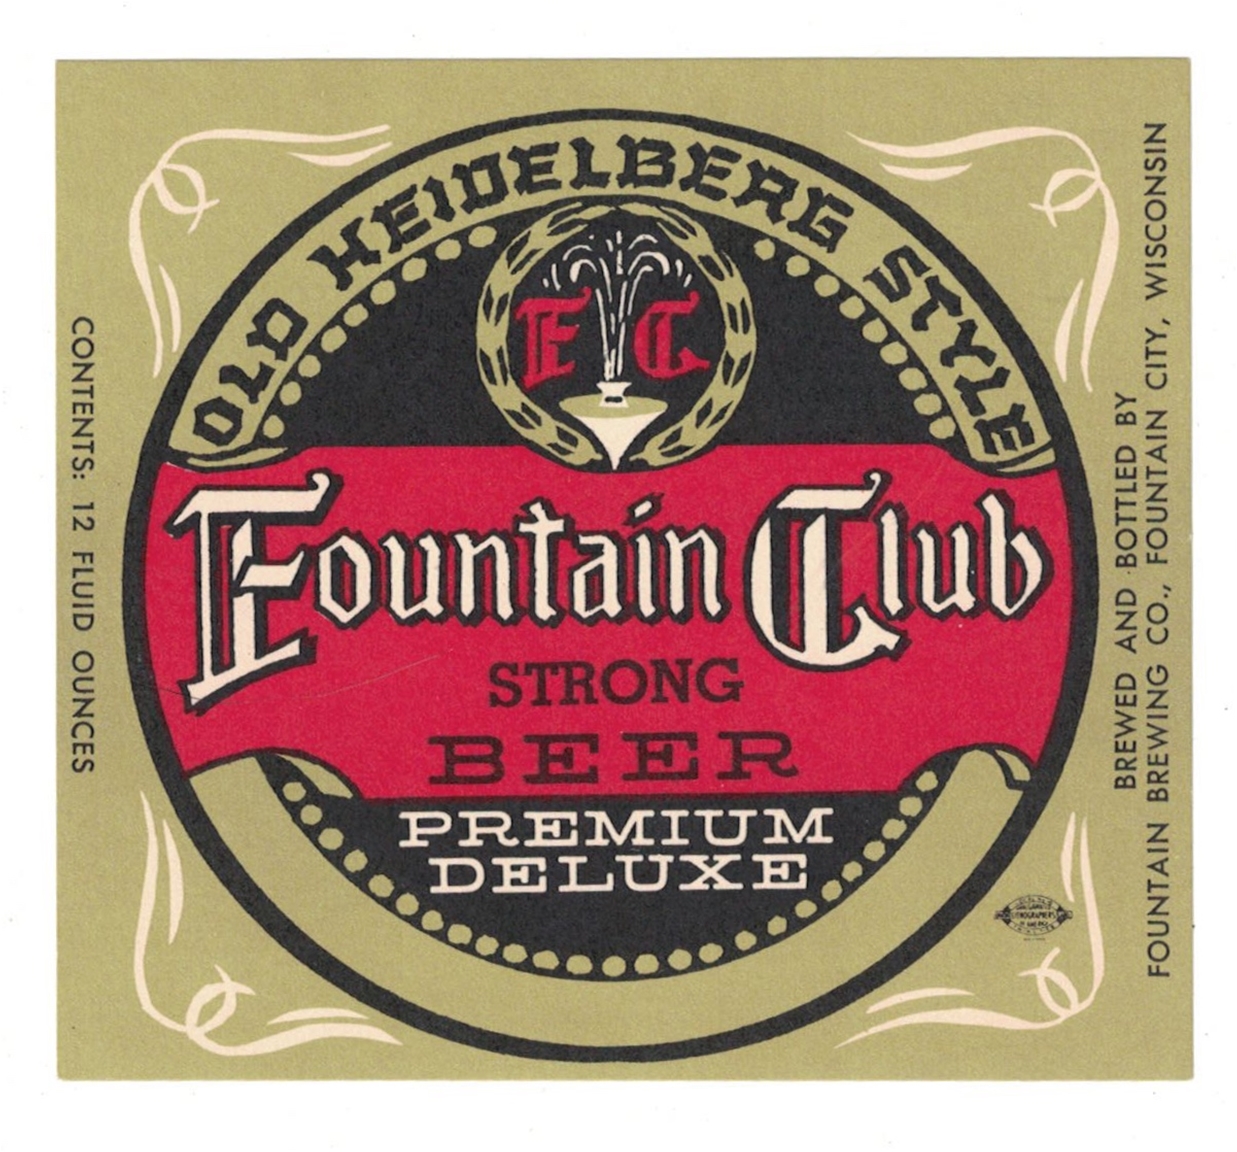 Old Heidelberg Style Fountain Club Strong Beer Label